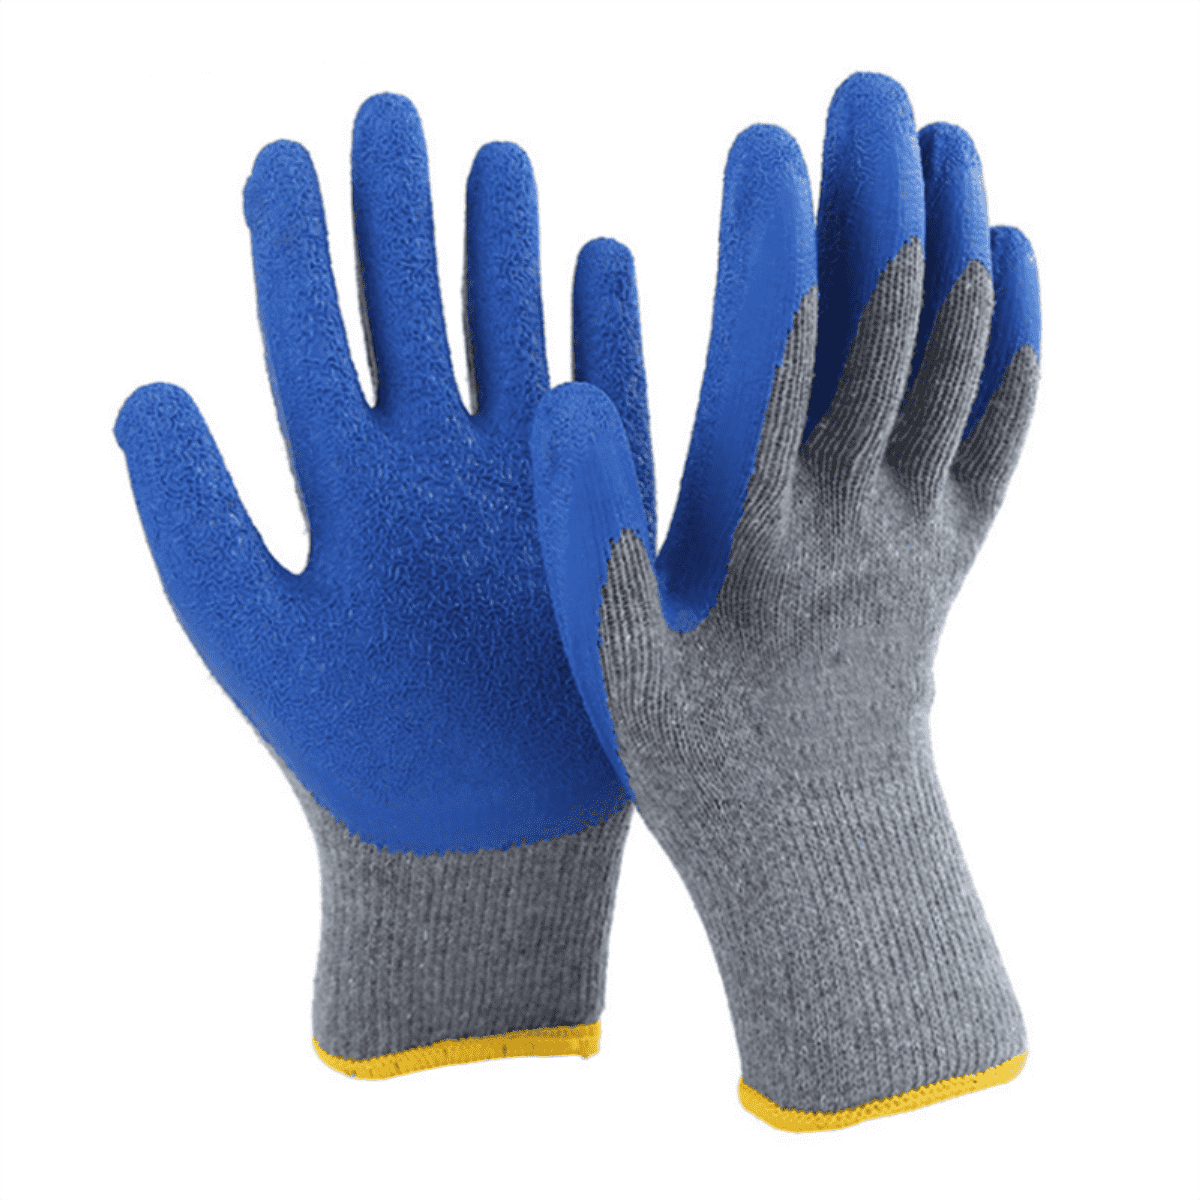 Construction Hand Protective 10 Gauge Polyester Blue Latex Crinkle Palm Coated Gloves